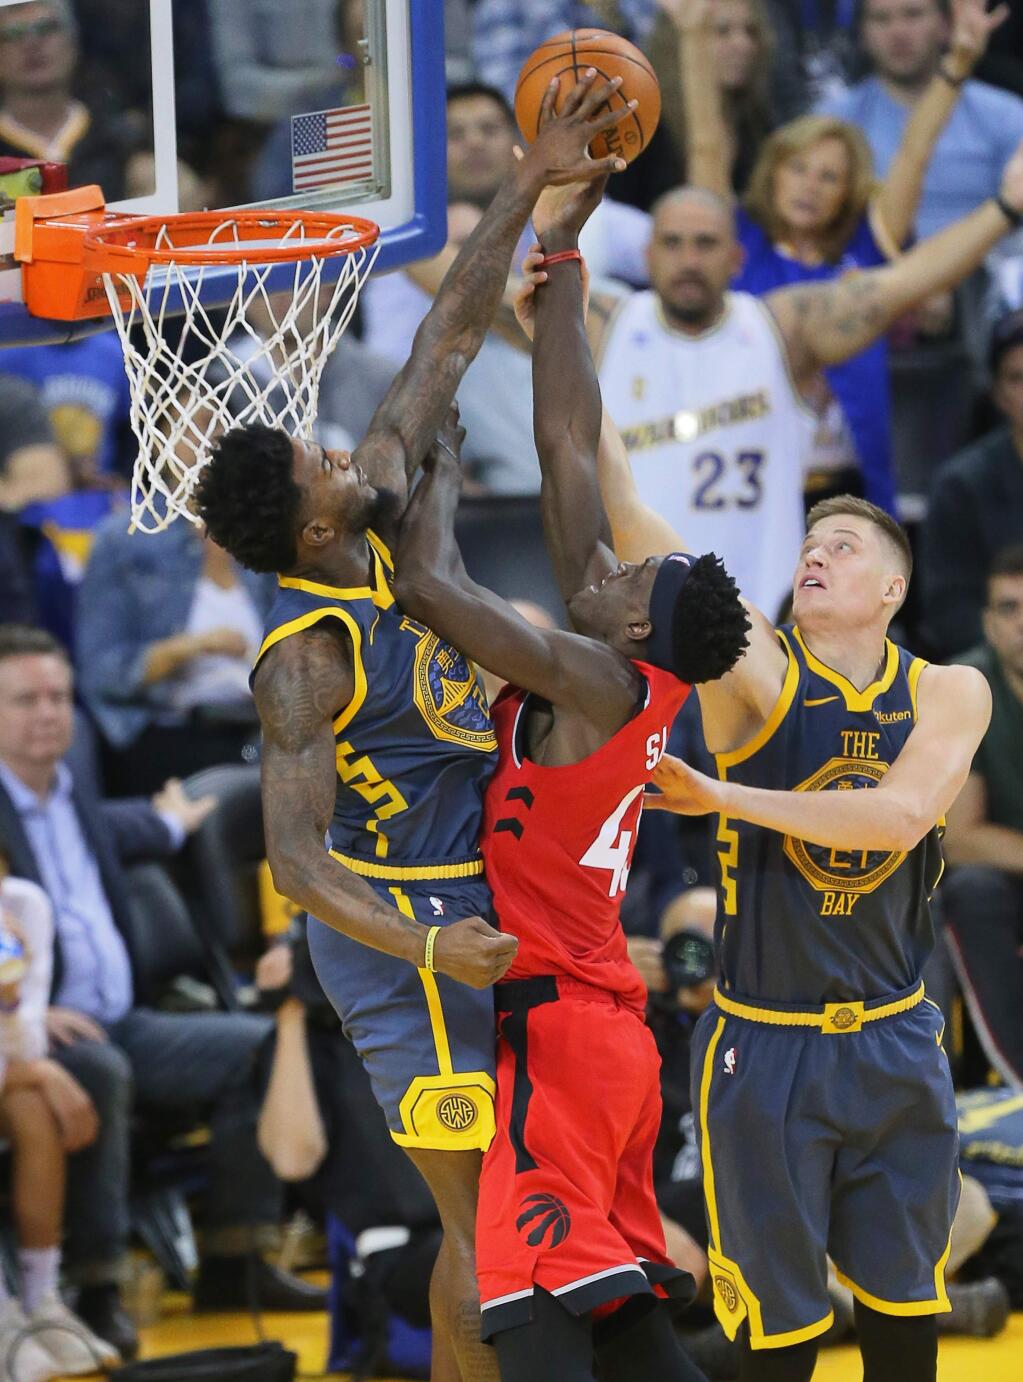 Warriors forward Jordan Bell, left, blocks a shot attempt by Raptors forward Pascal Siakam, while Warriors forward Jonas Jerebko helps on defense, during their game in Oakland on Wednesday, December 12, 2018. (Christopher Chung/ The Press Democrat)